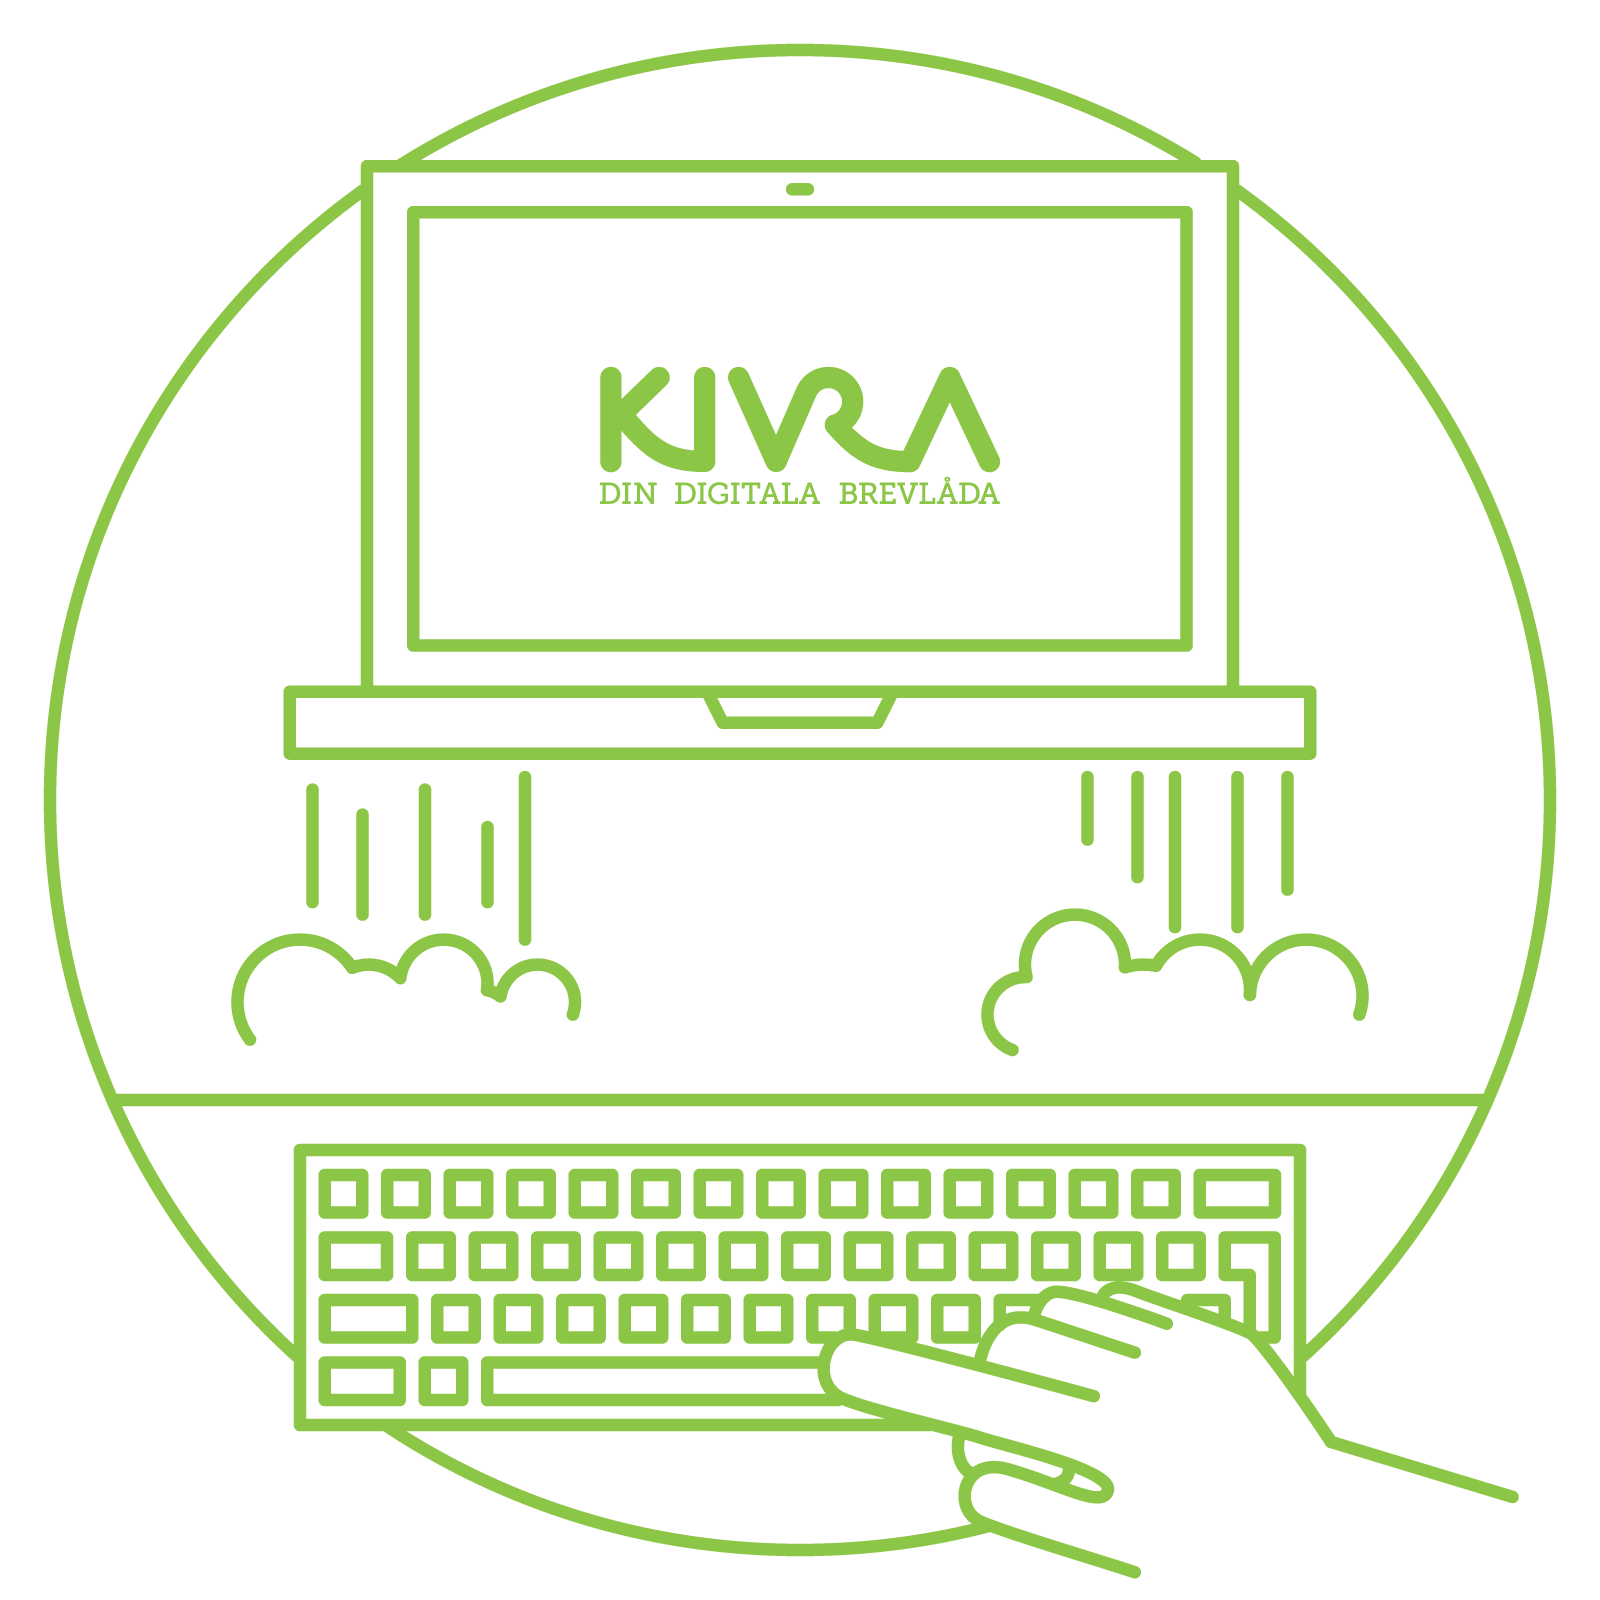 kivra-easy-to-launch-01.png